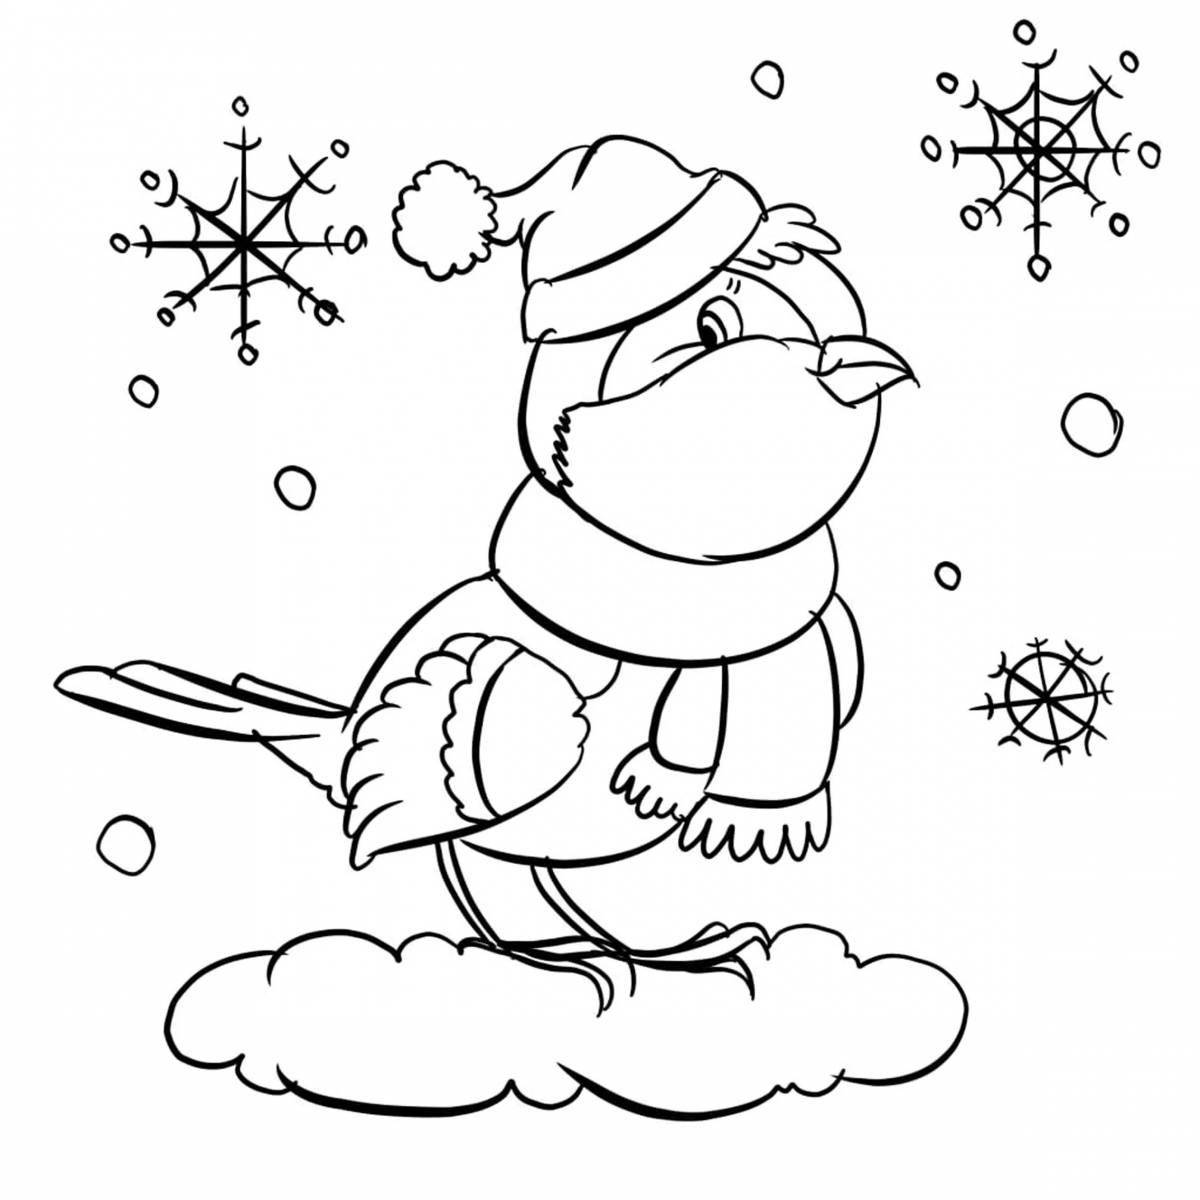 Cute winter birds coloring book for 6-7 year olds